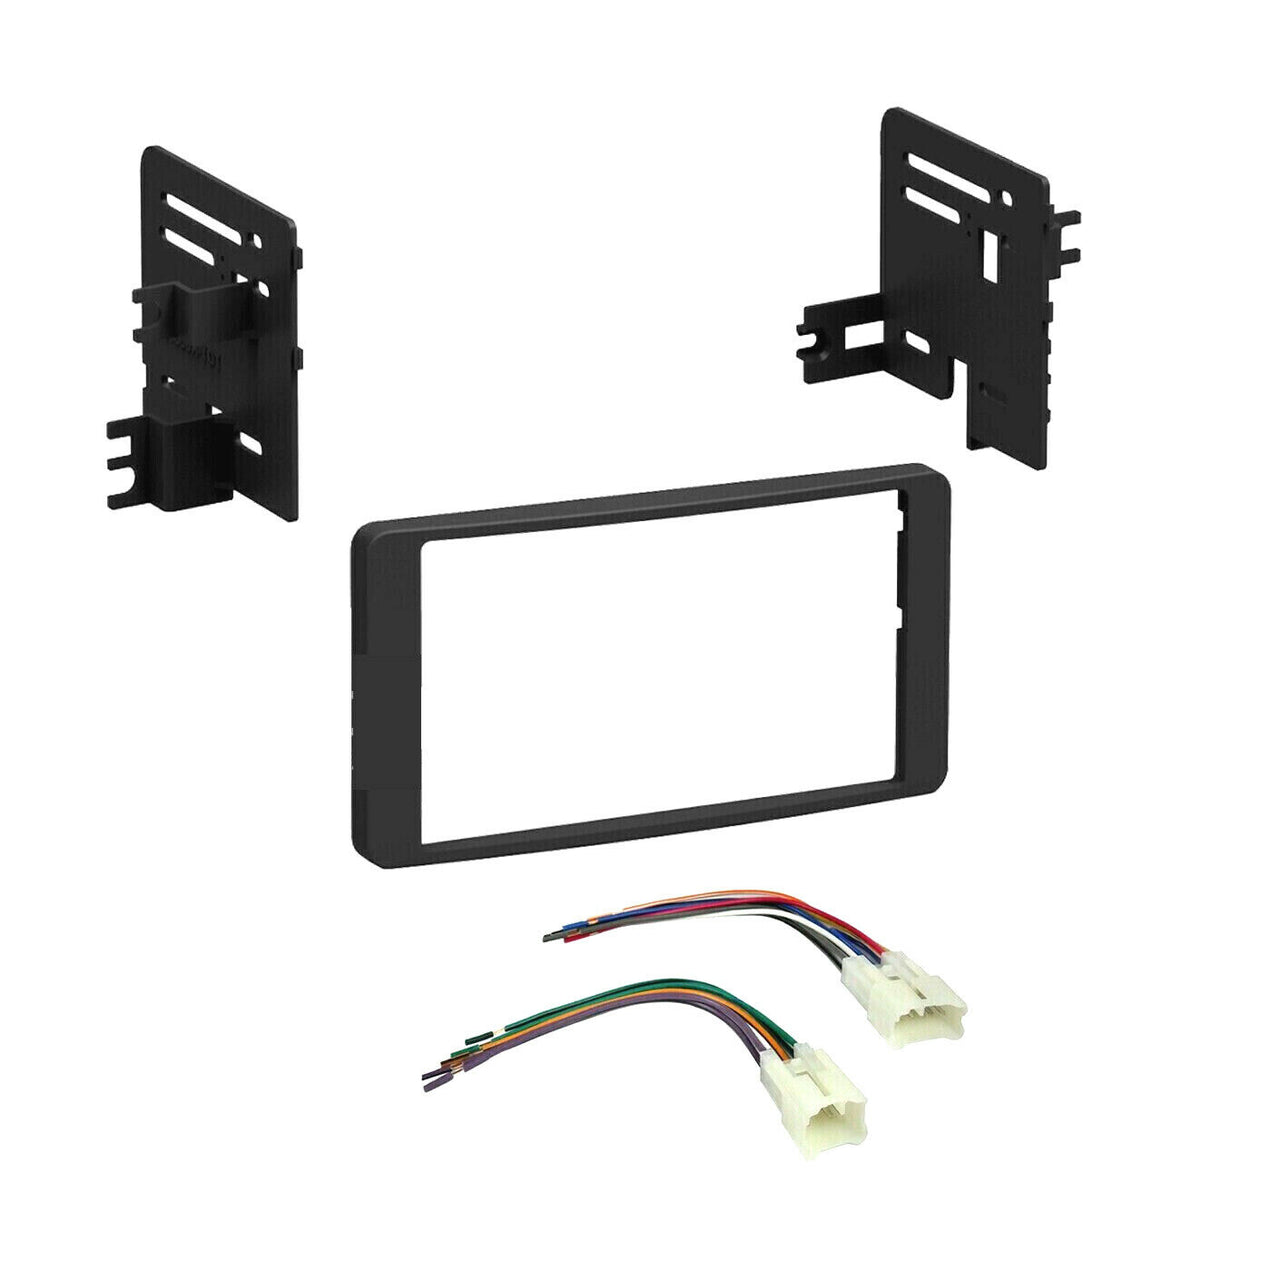 Absolute Car Radio Stereo Double Din Dash Kit & Harness for 2003-2007 Toyota Tundra Sequoia